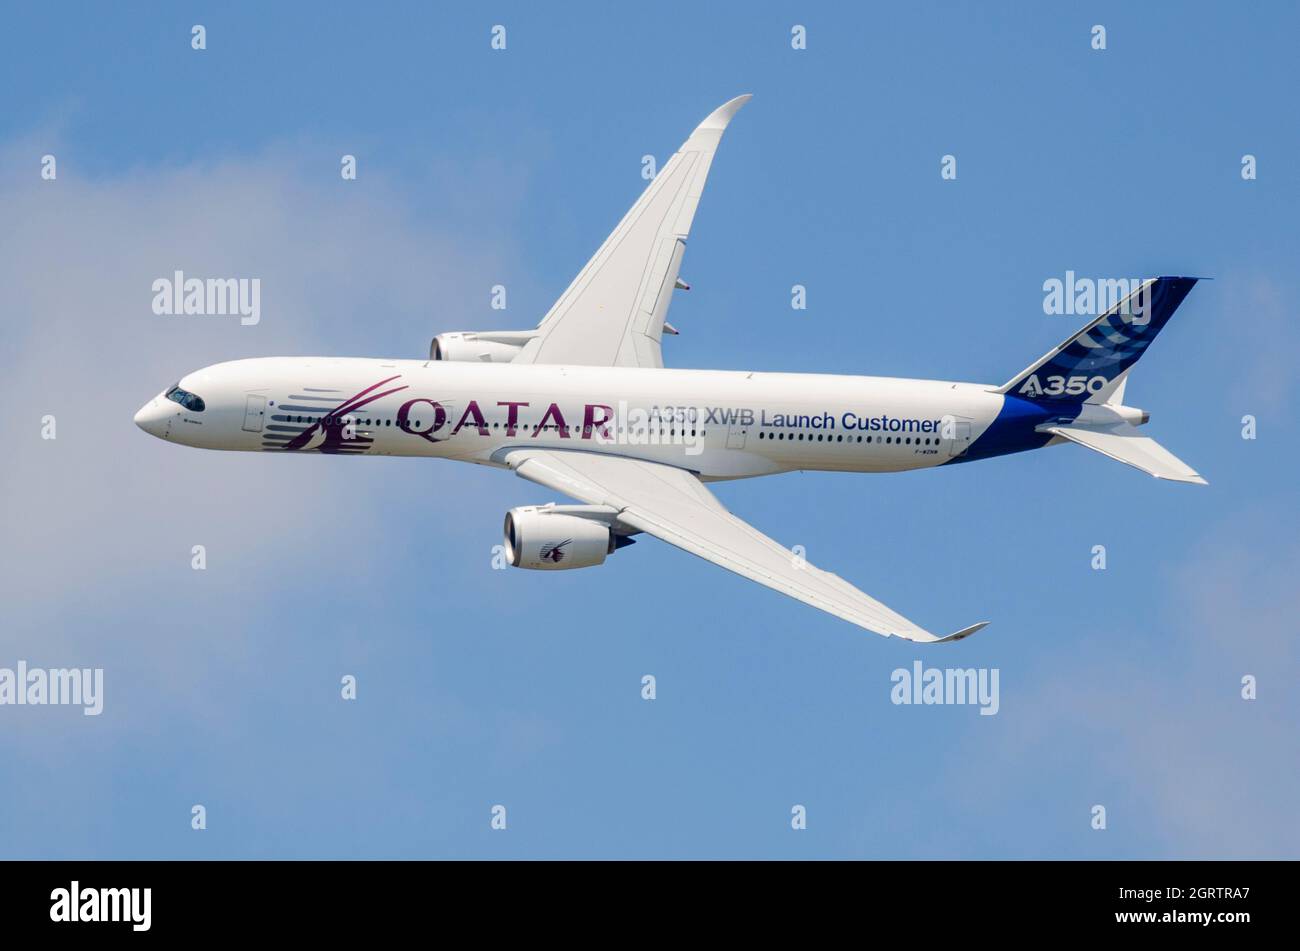 Airbus A350 jet airliner plane making the brand new type's public debut at Farnborough 2014 in Qatar livery. XWB (extra wide body) launch customer Stock Photo